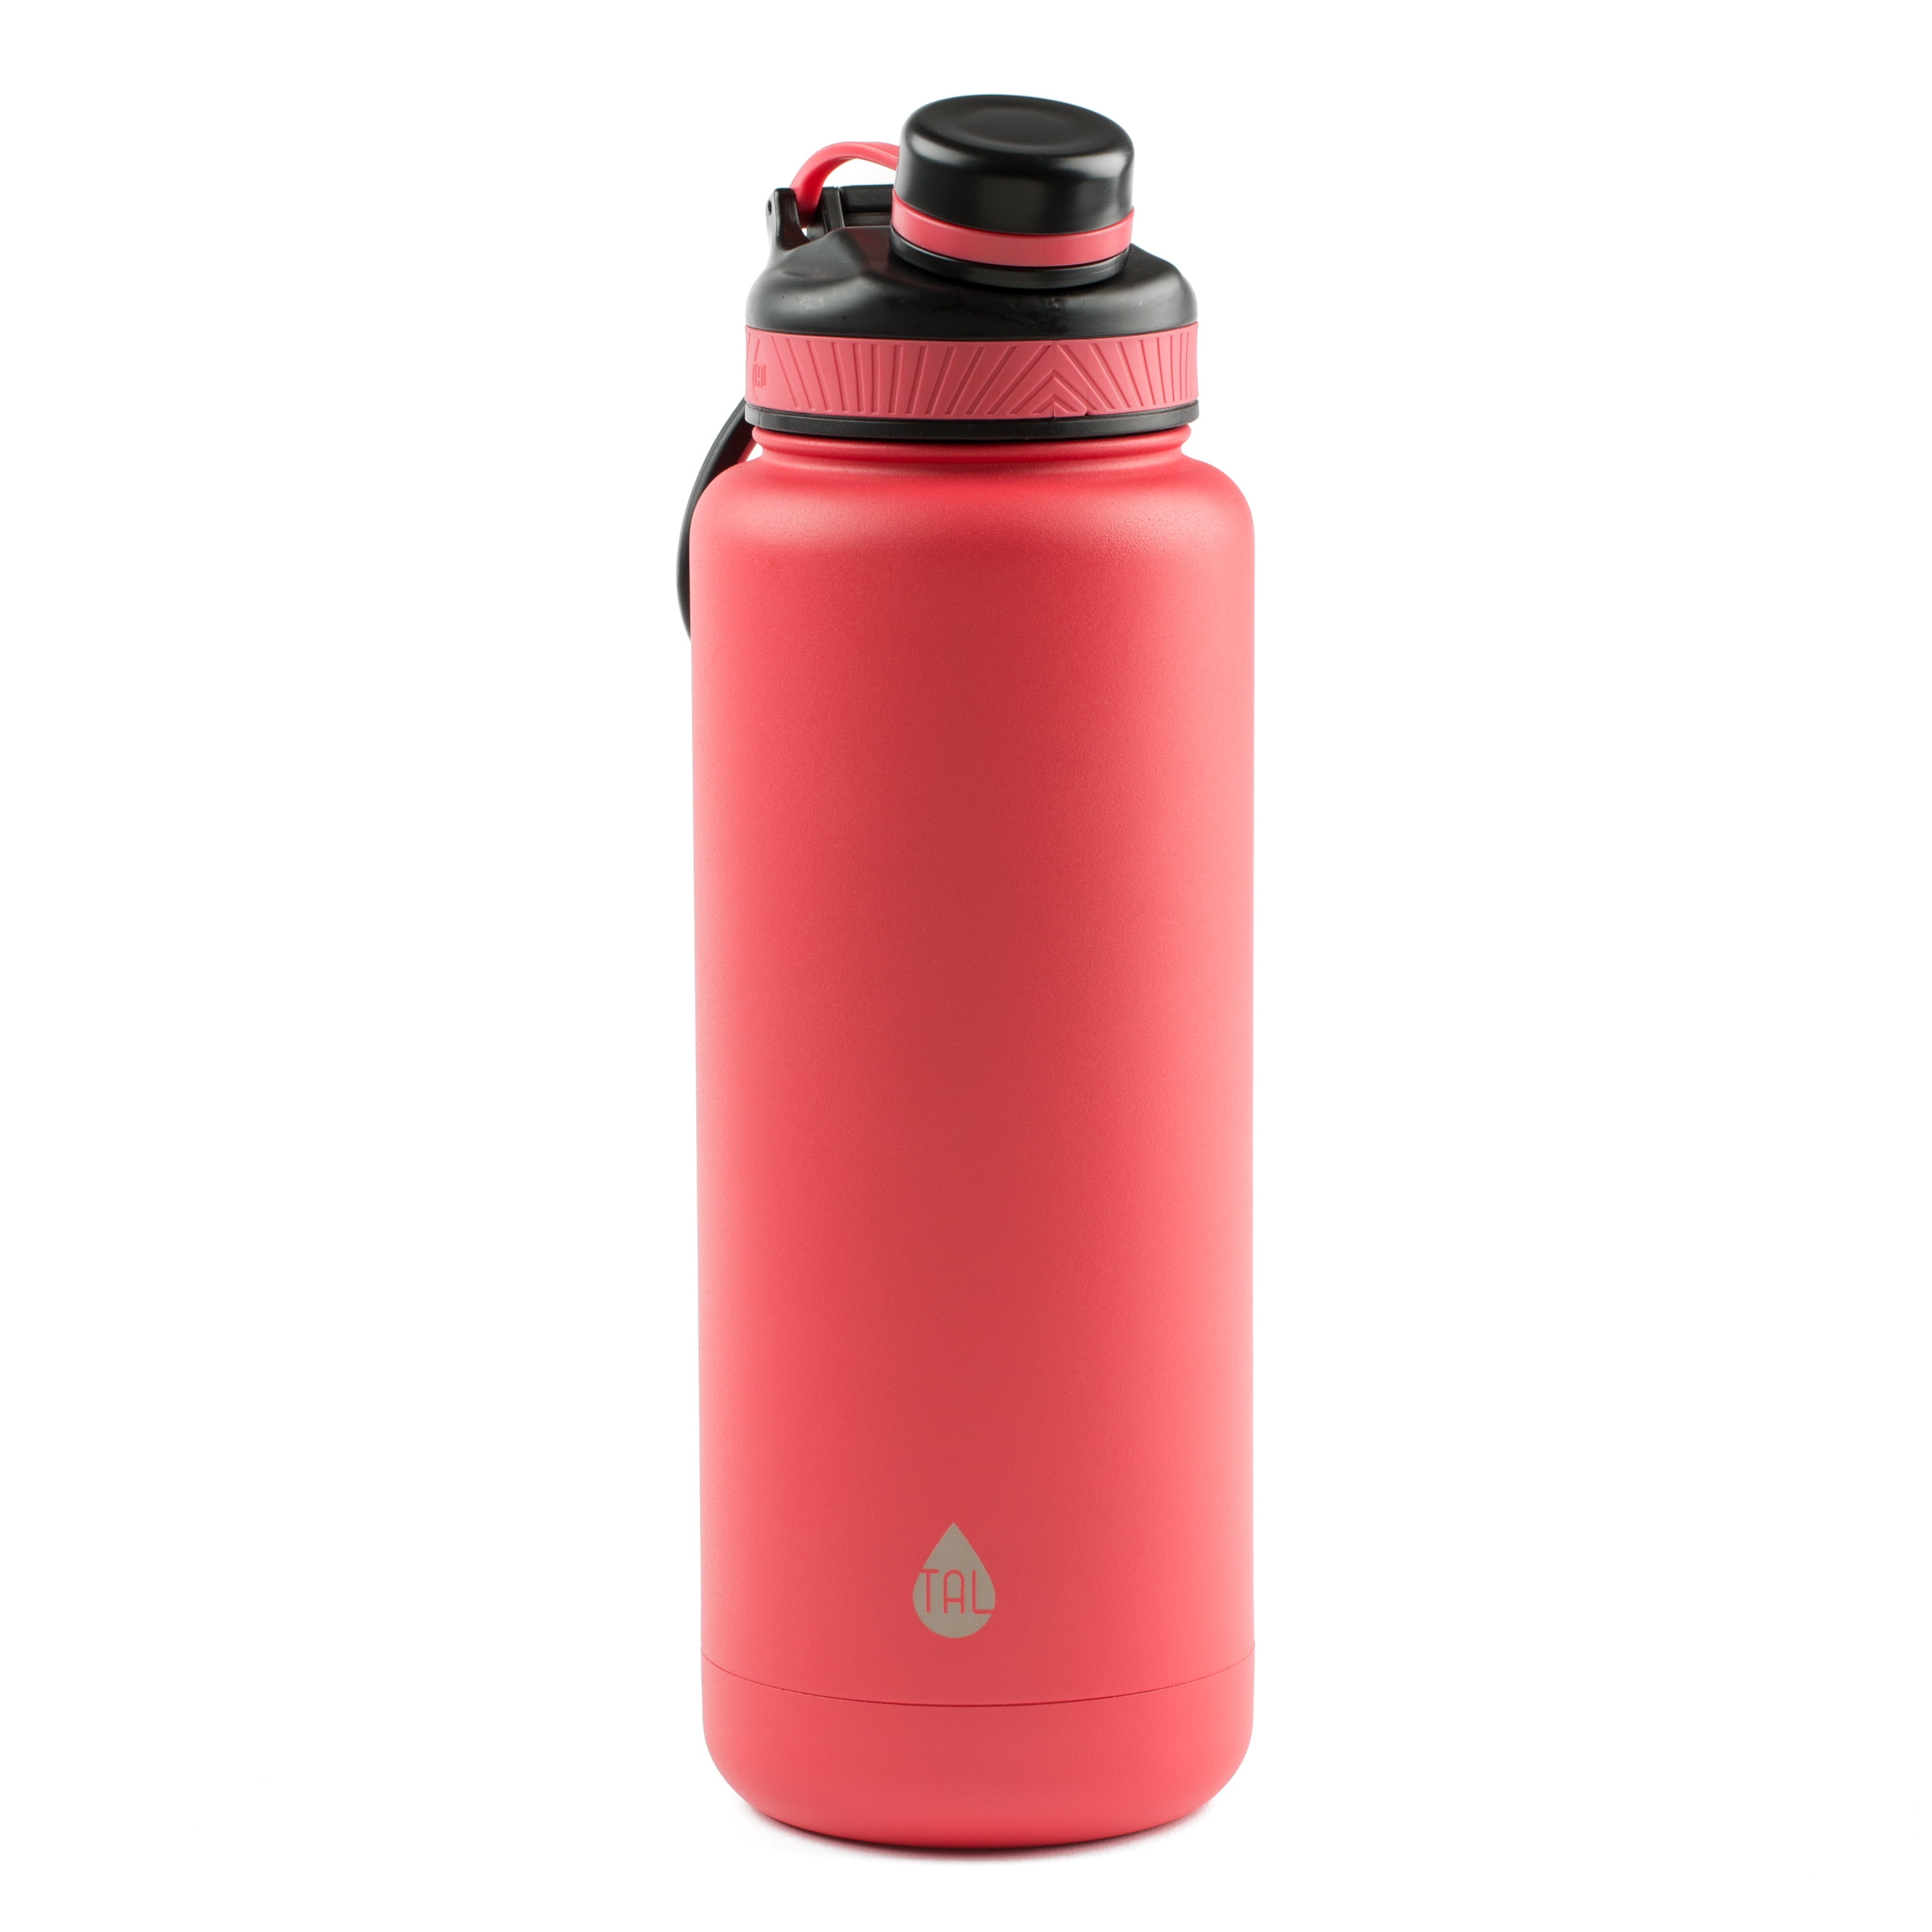 TAL Ranger Pro 64 oz Double Wall Insulated Stainless Steel Water Bottle  with Wide Mouth Lid only $16.98 at Walmart!